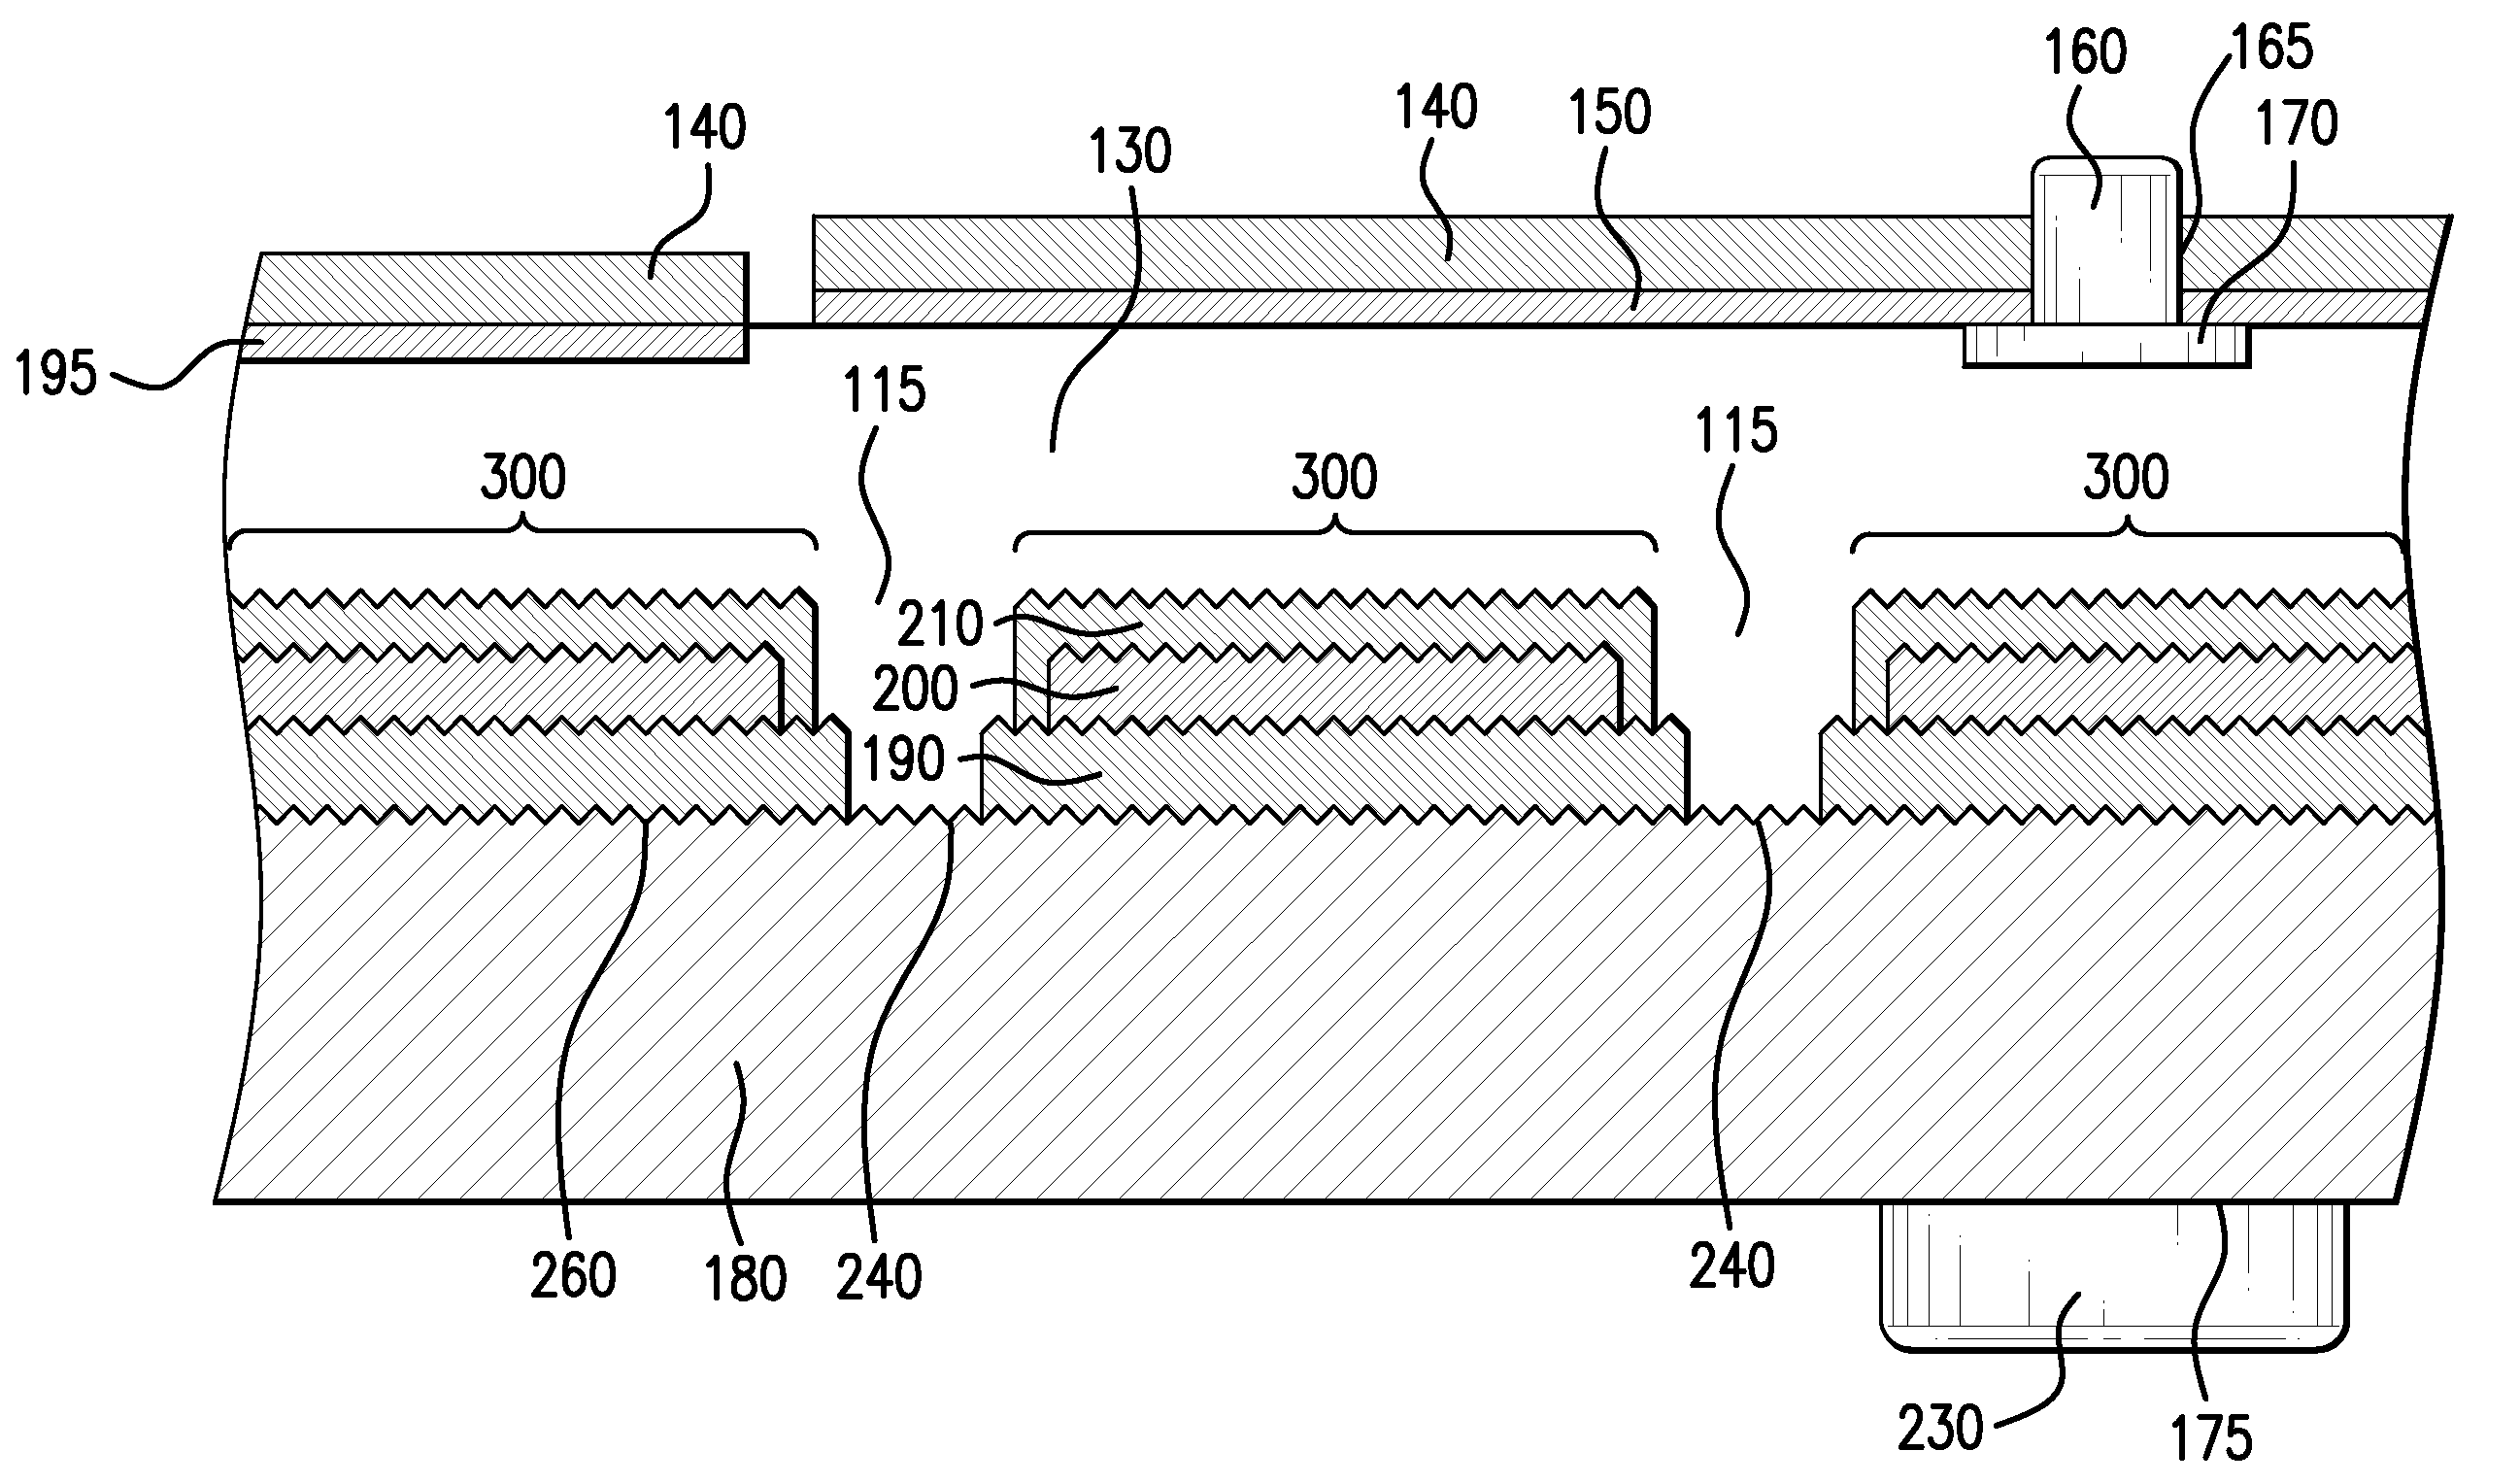 Photovoltaic Thin-Film Solar Cell and Method Of Making The Same